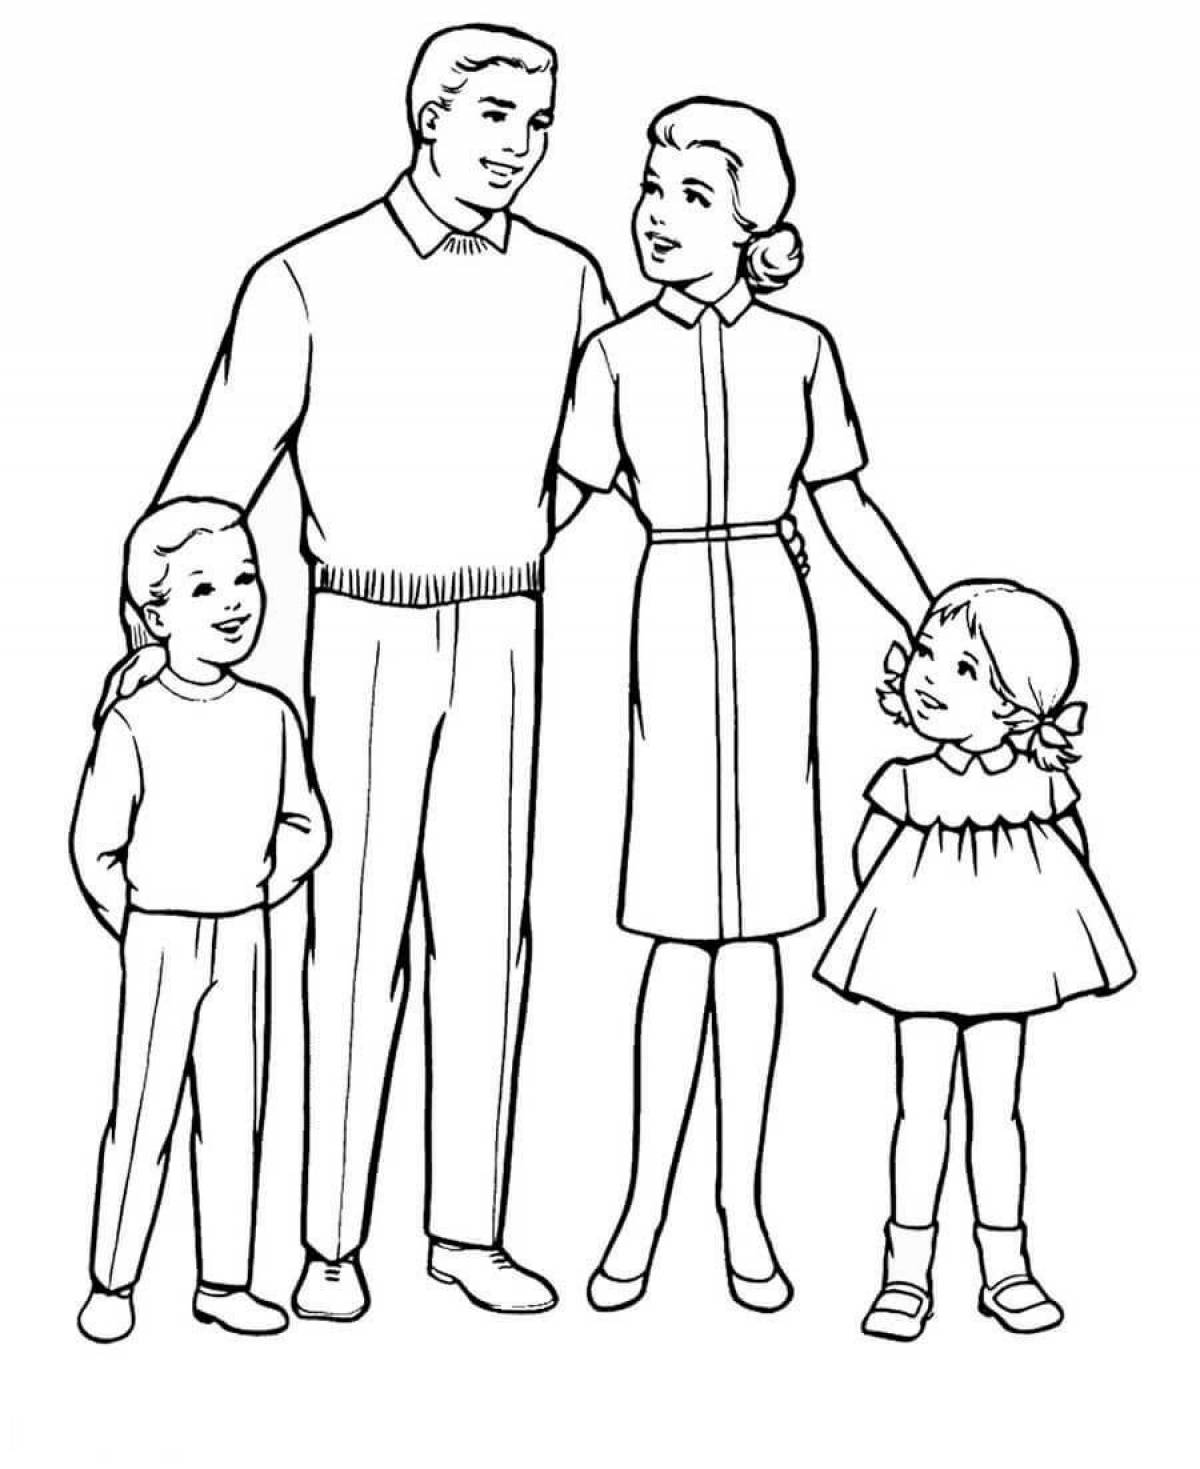 Adorable mom and dad coloring book for kids